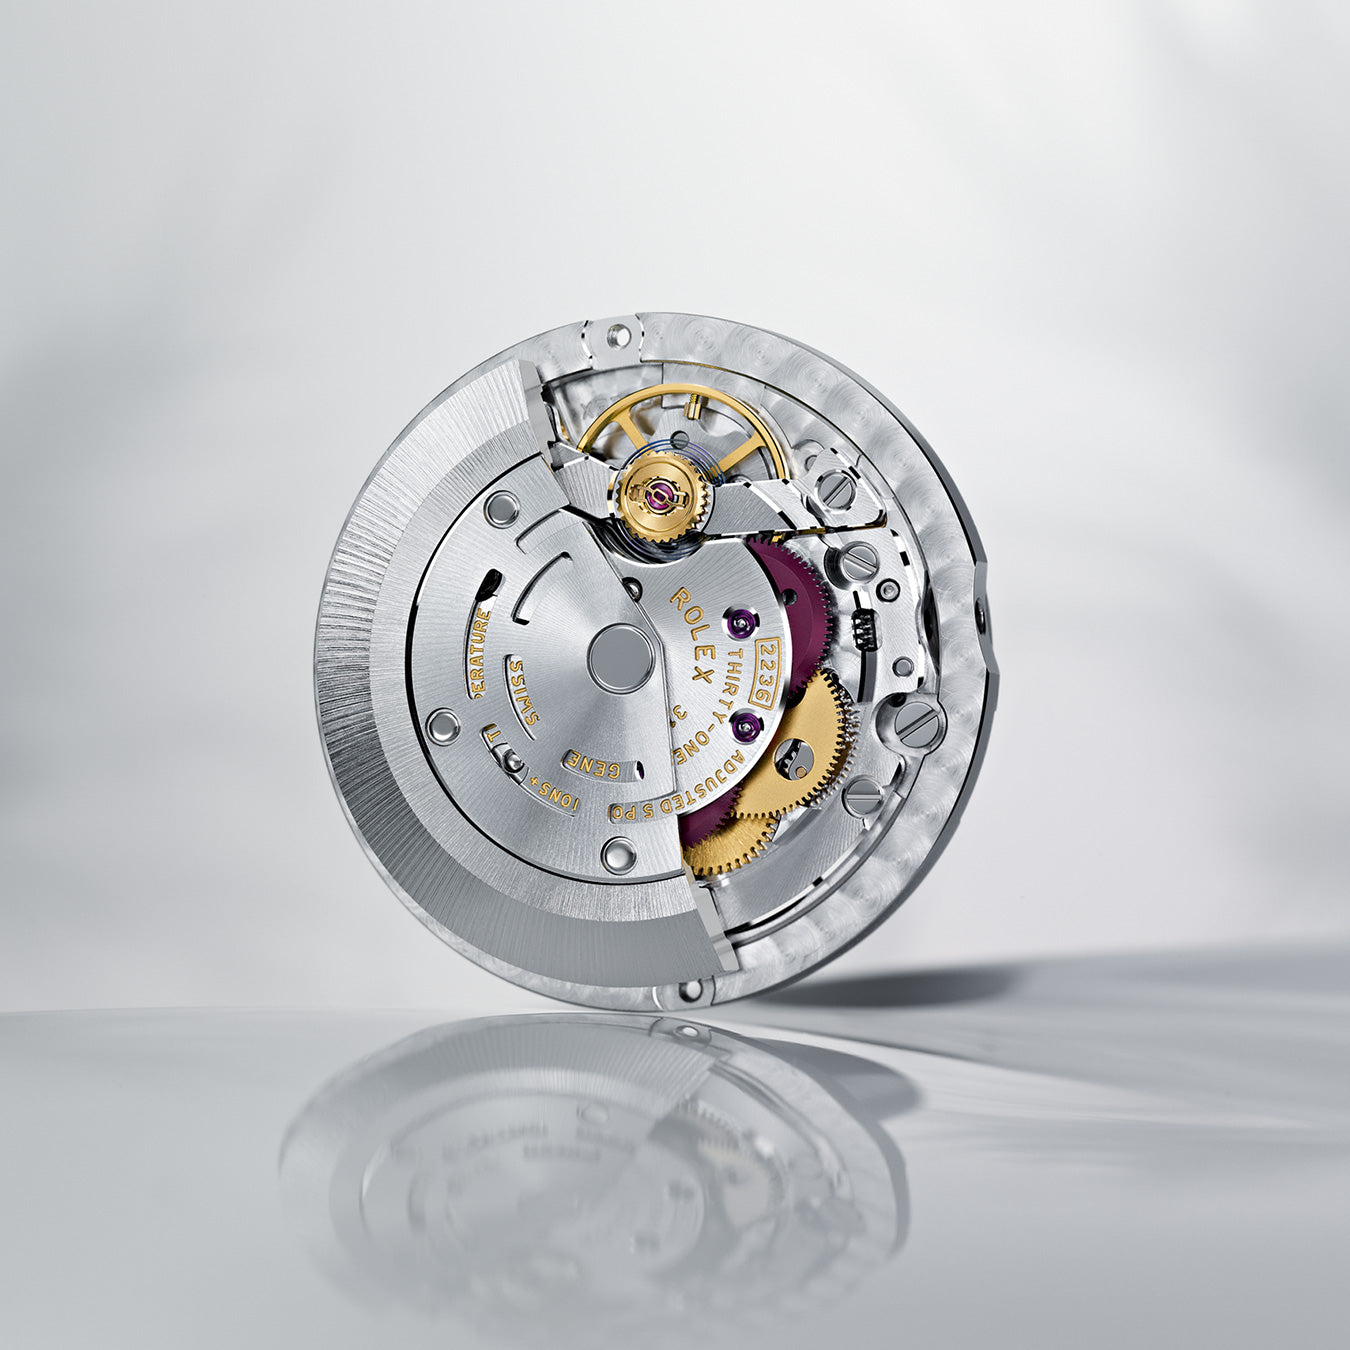 Calibre 2236, a Self-winding Mechanical Movement Used in Rolex Lady-Datejust Watches